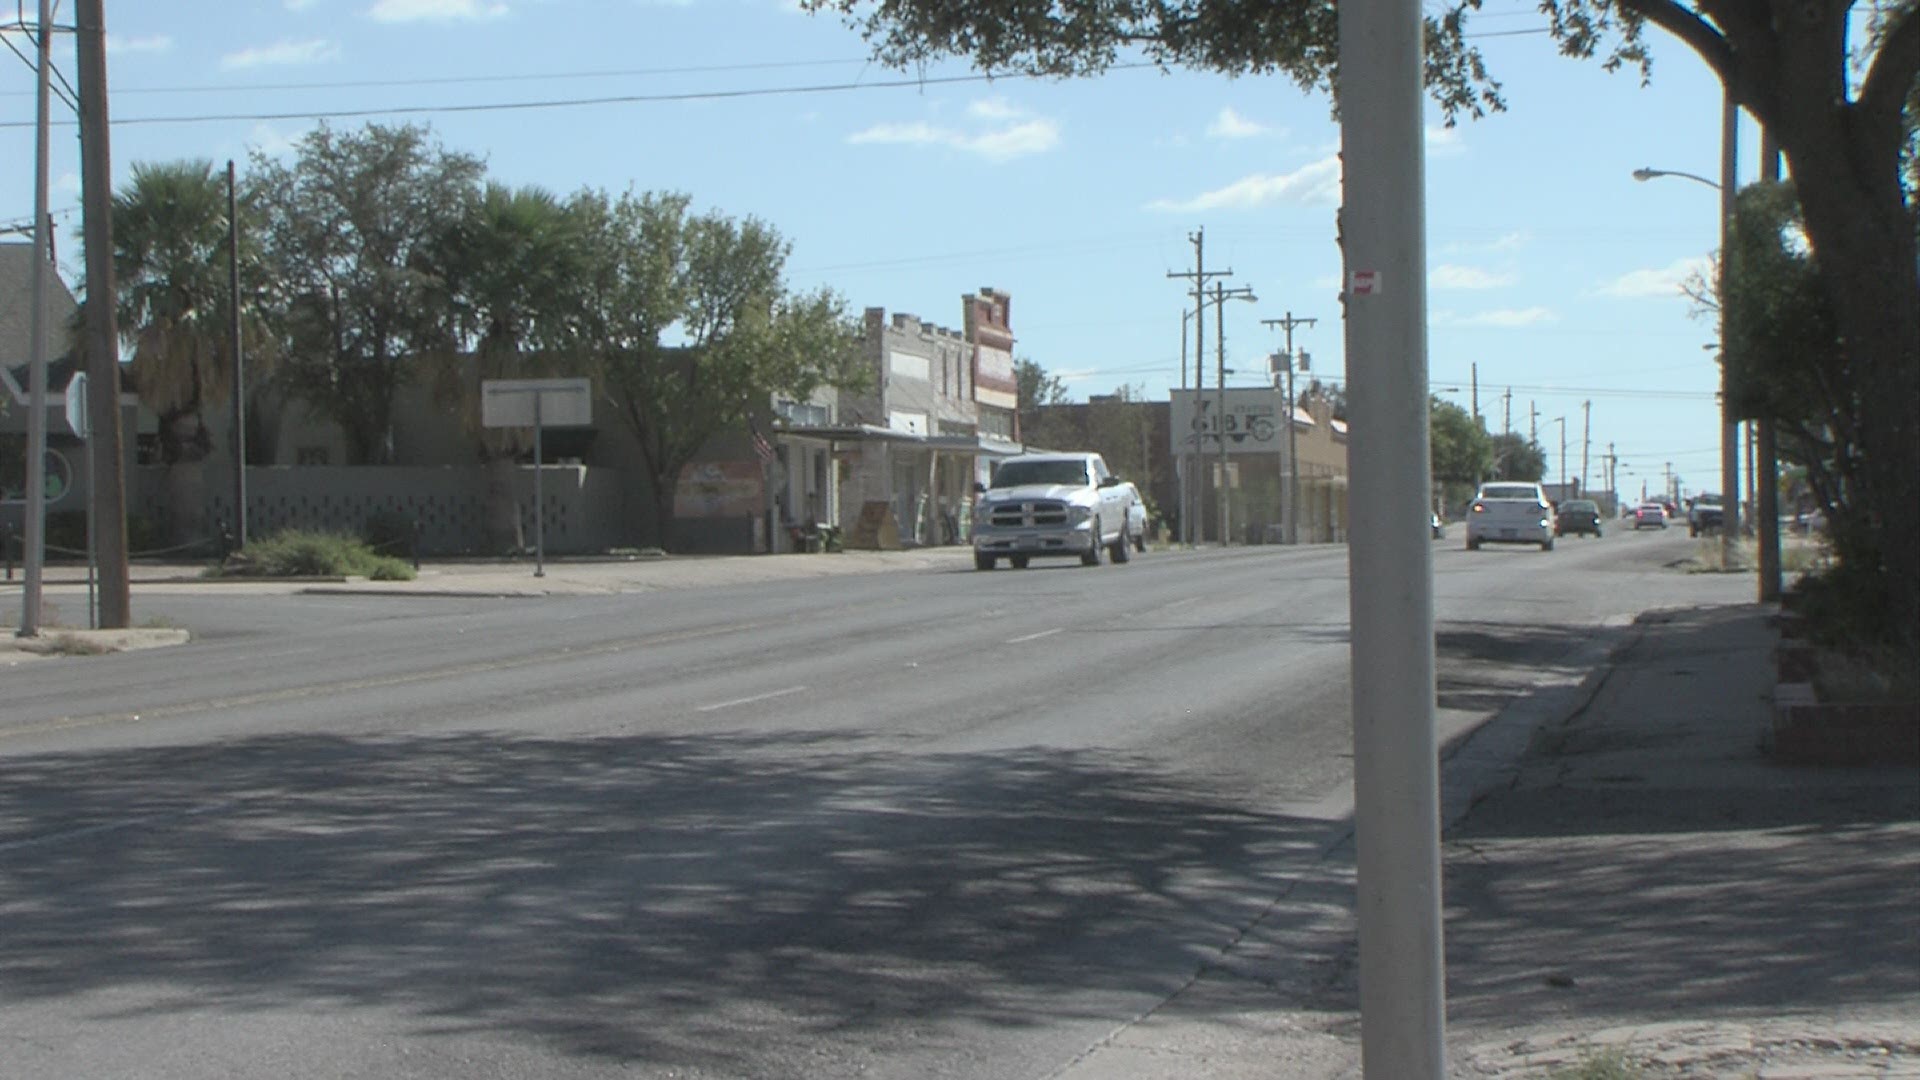 Historical towns of the Concho Valley that once flourished before larger communities rose.